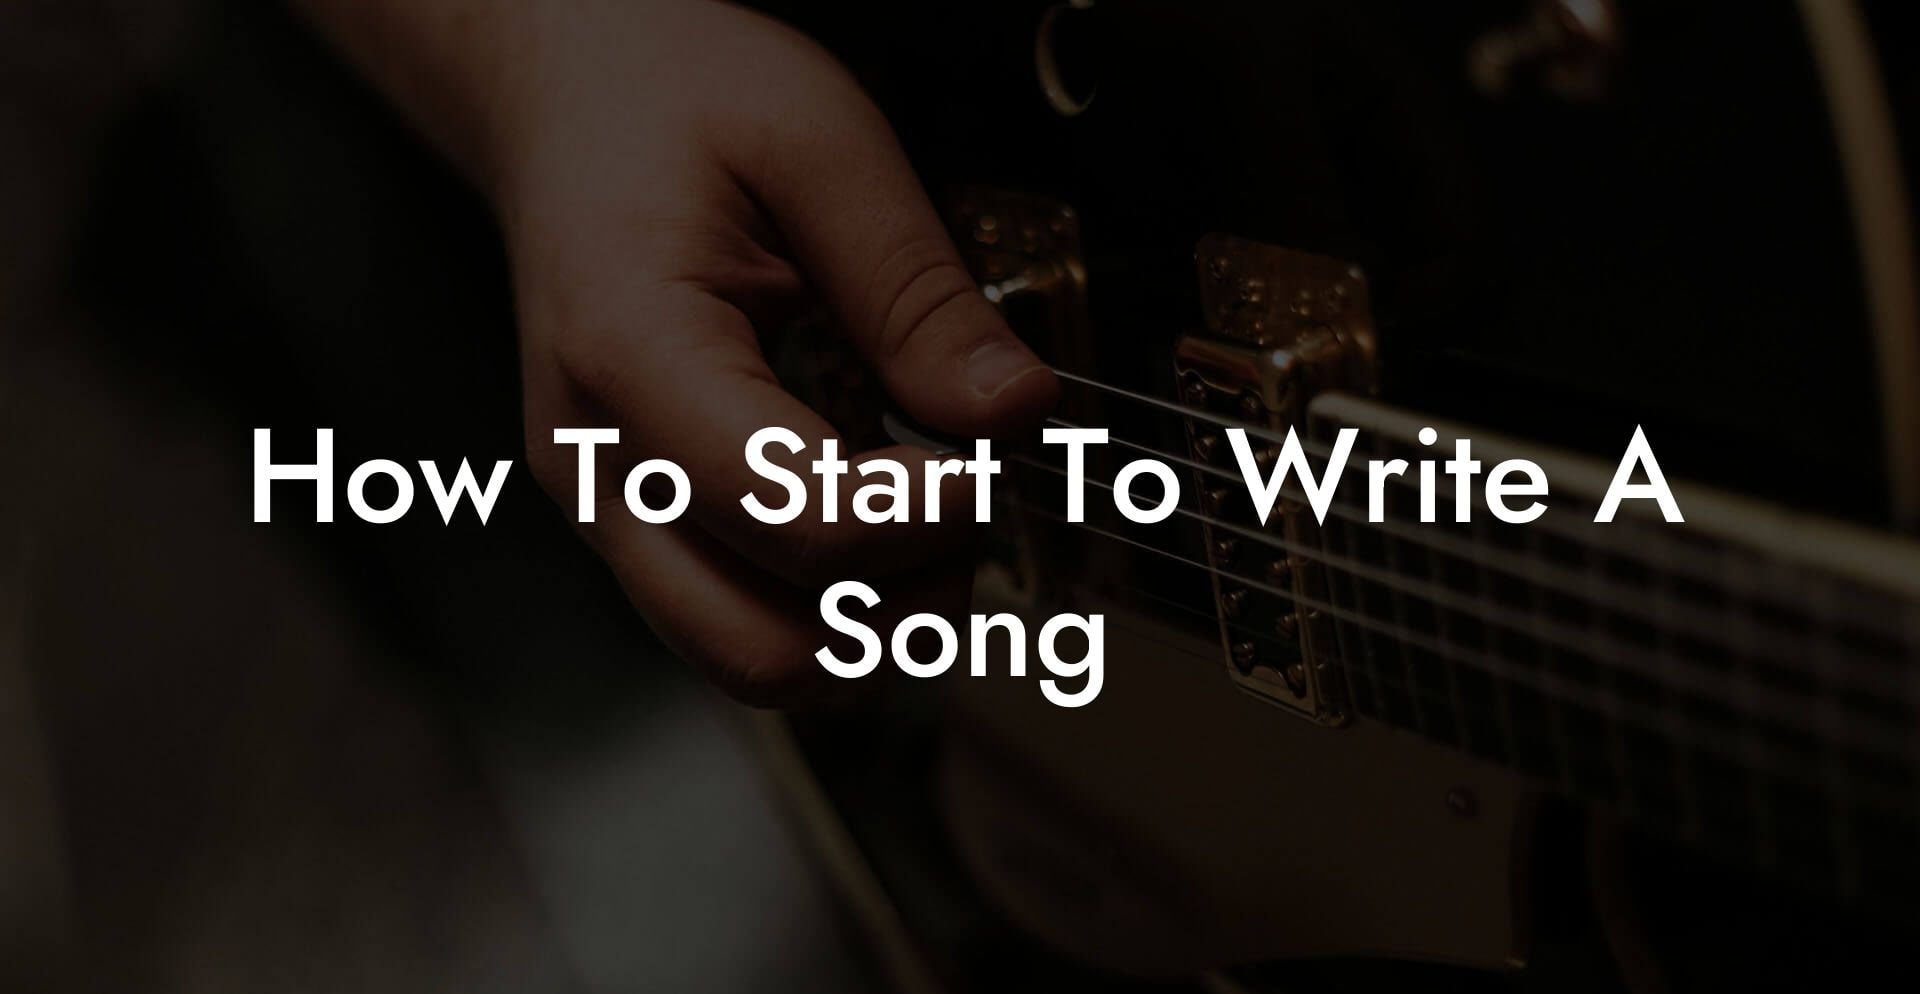 how to start to write a song lyric assistant